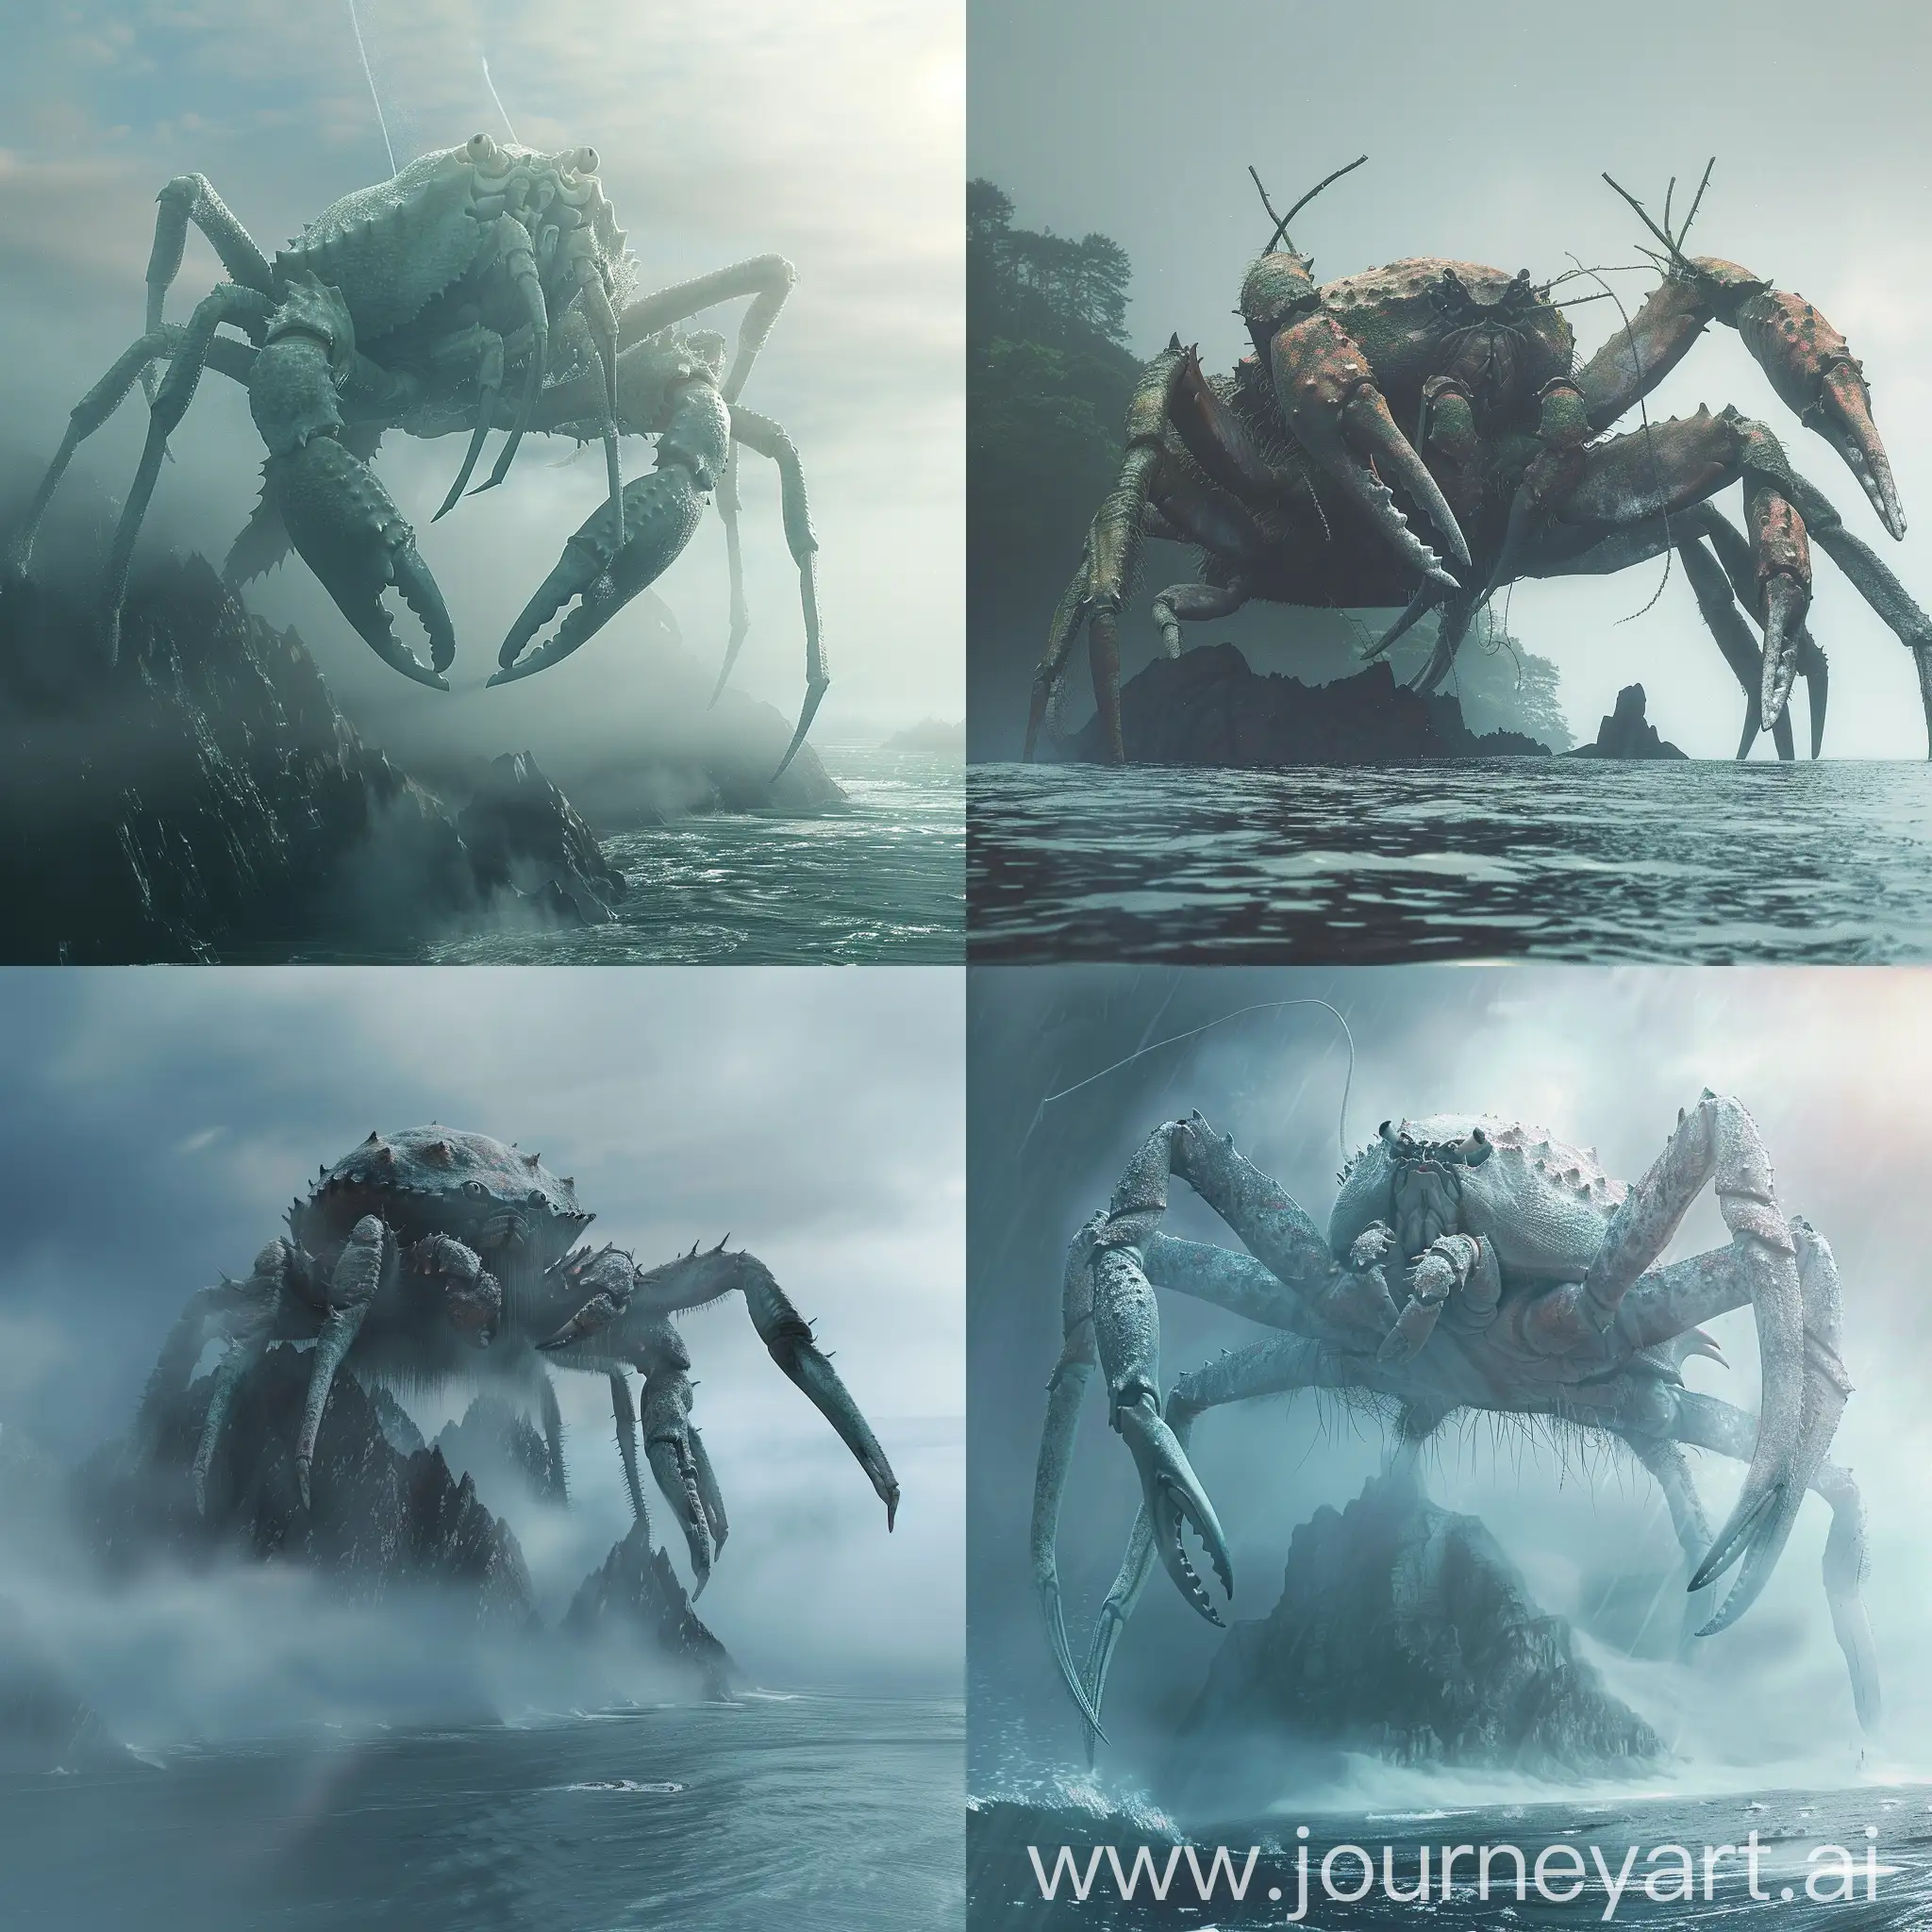 Eldritch-Giant-Crab-Monster-Emerging-from-Ocean-Mist-on-Desolate-Island